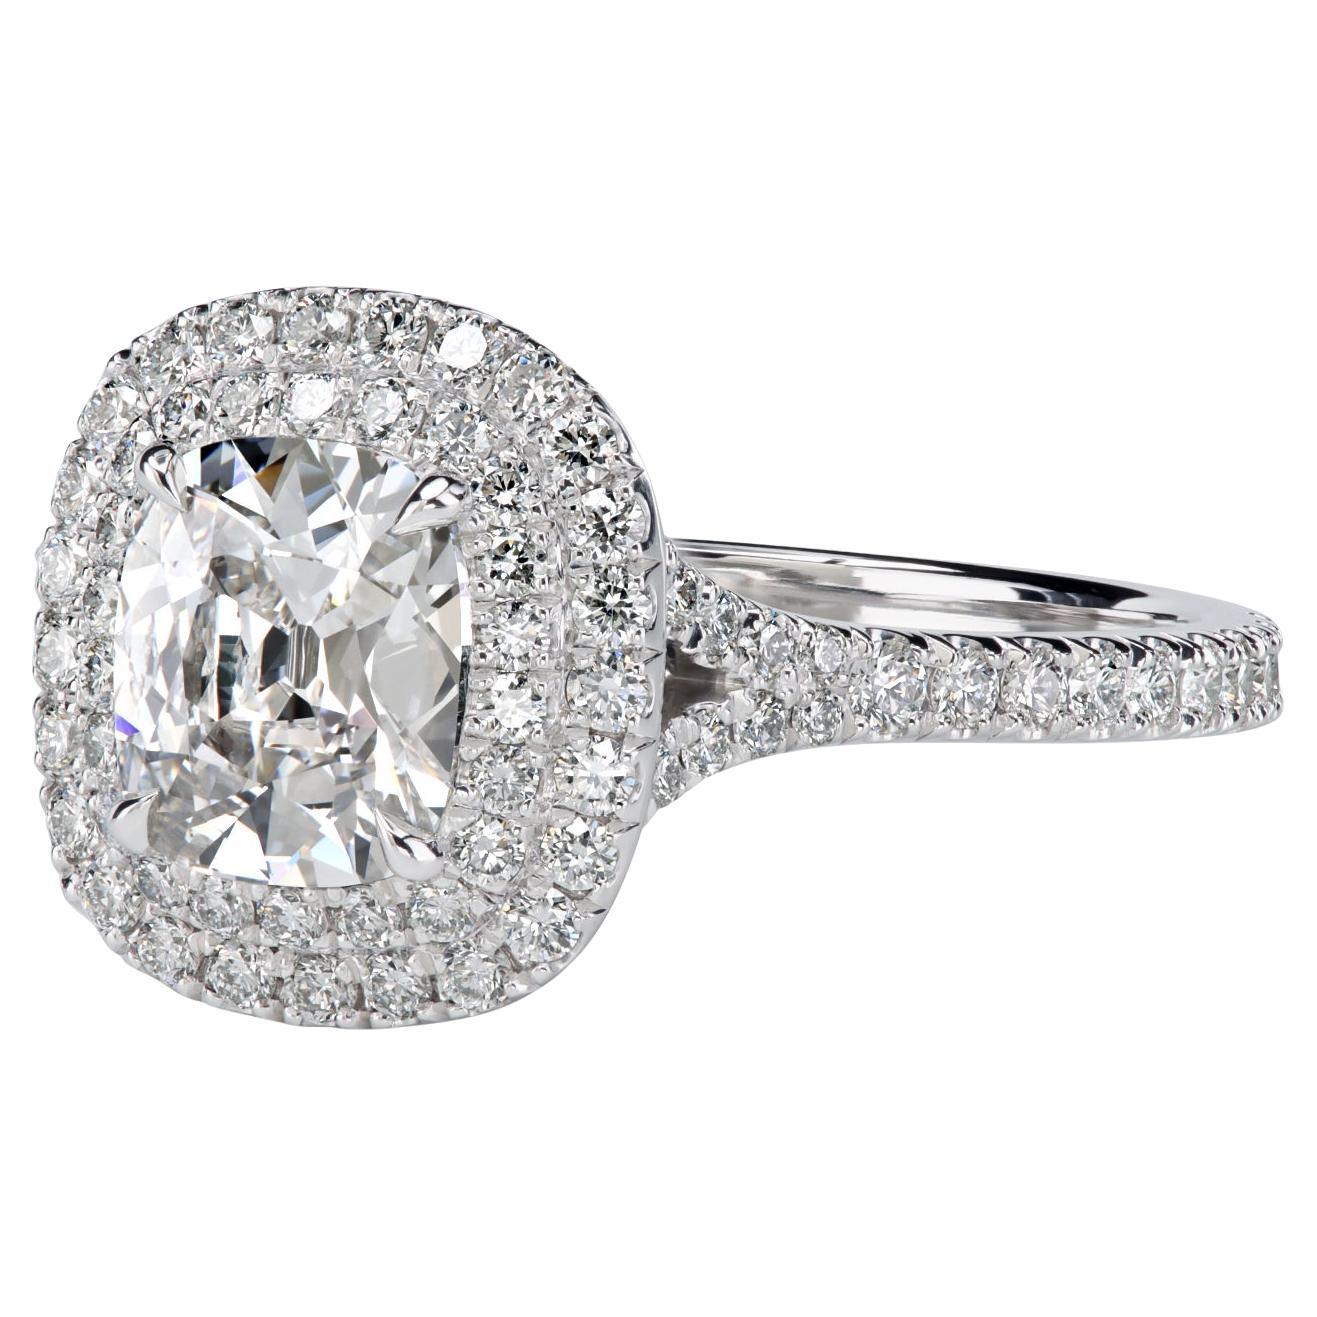 Leon Mege Scalloped Halo Ring with Old European Cut Diamond in Platinum ...